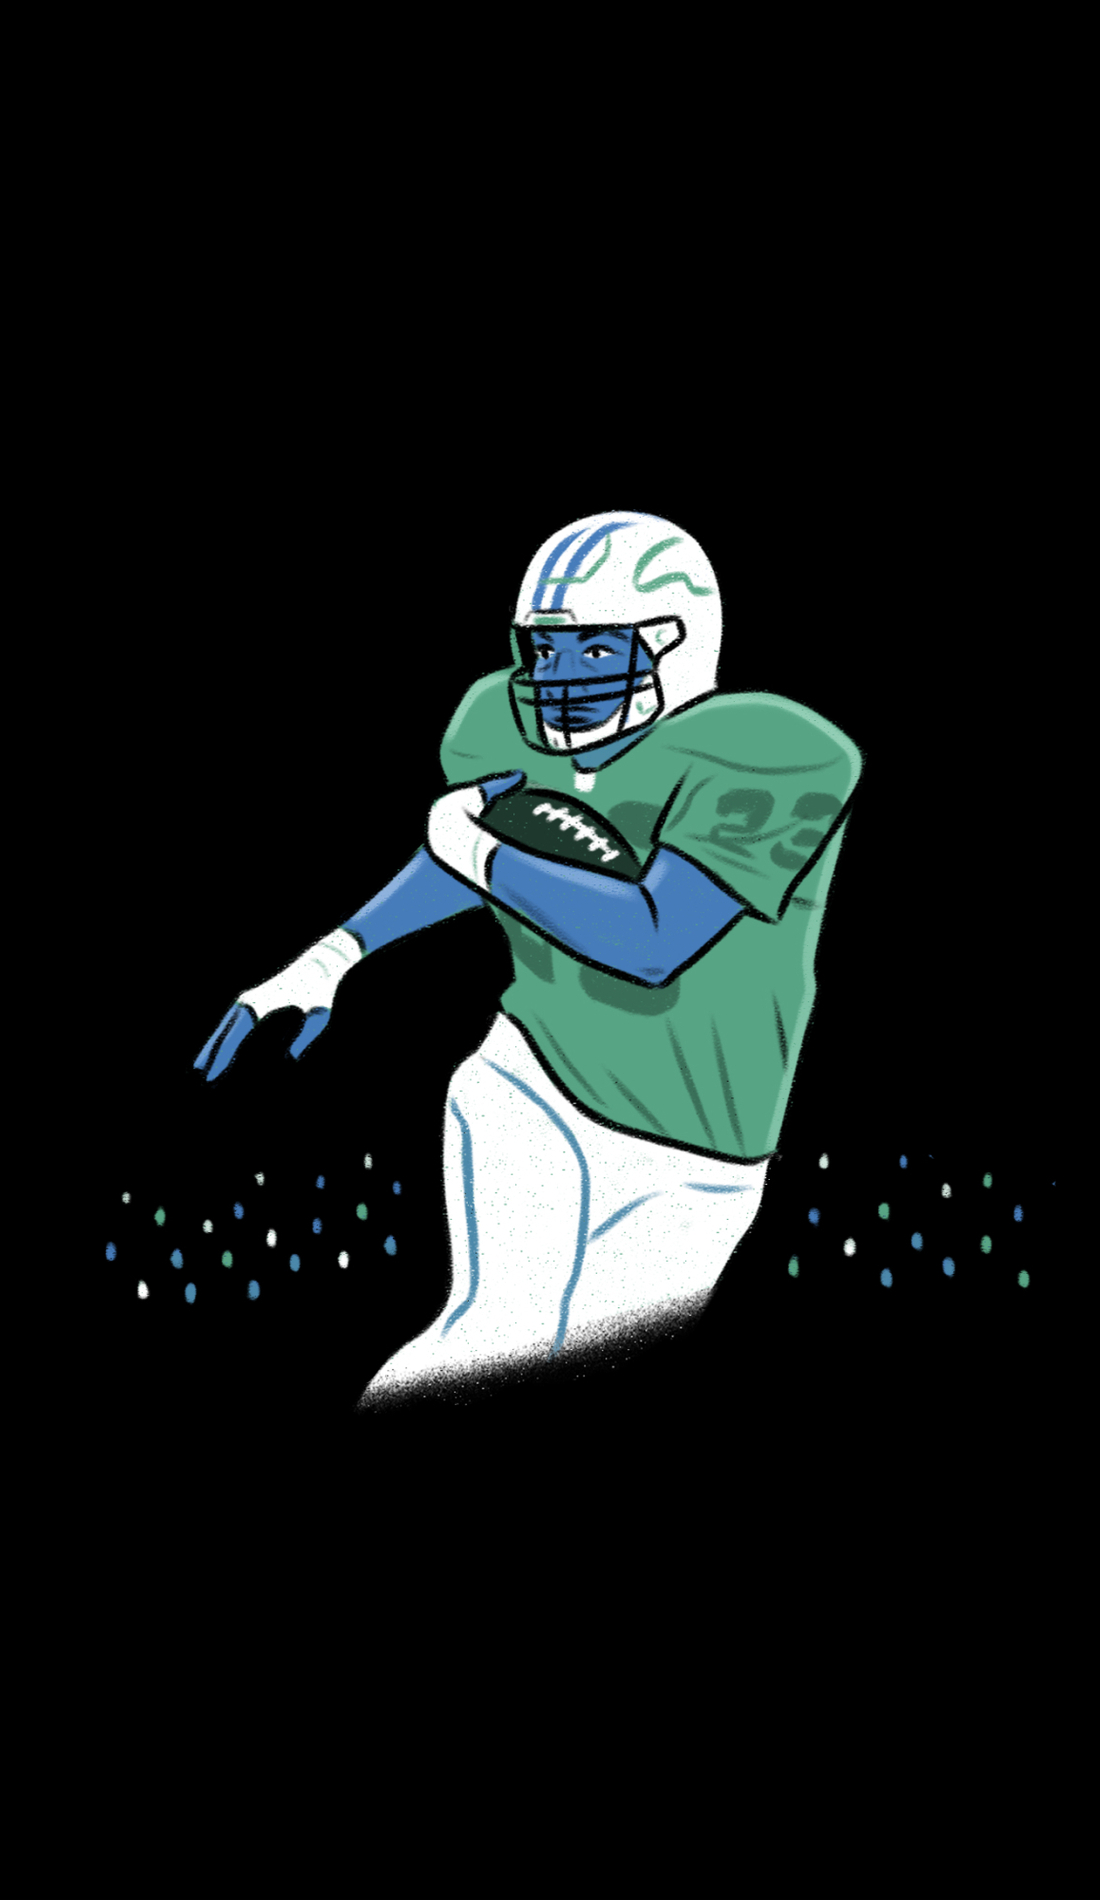 A Wagner Seahawks Football live event